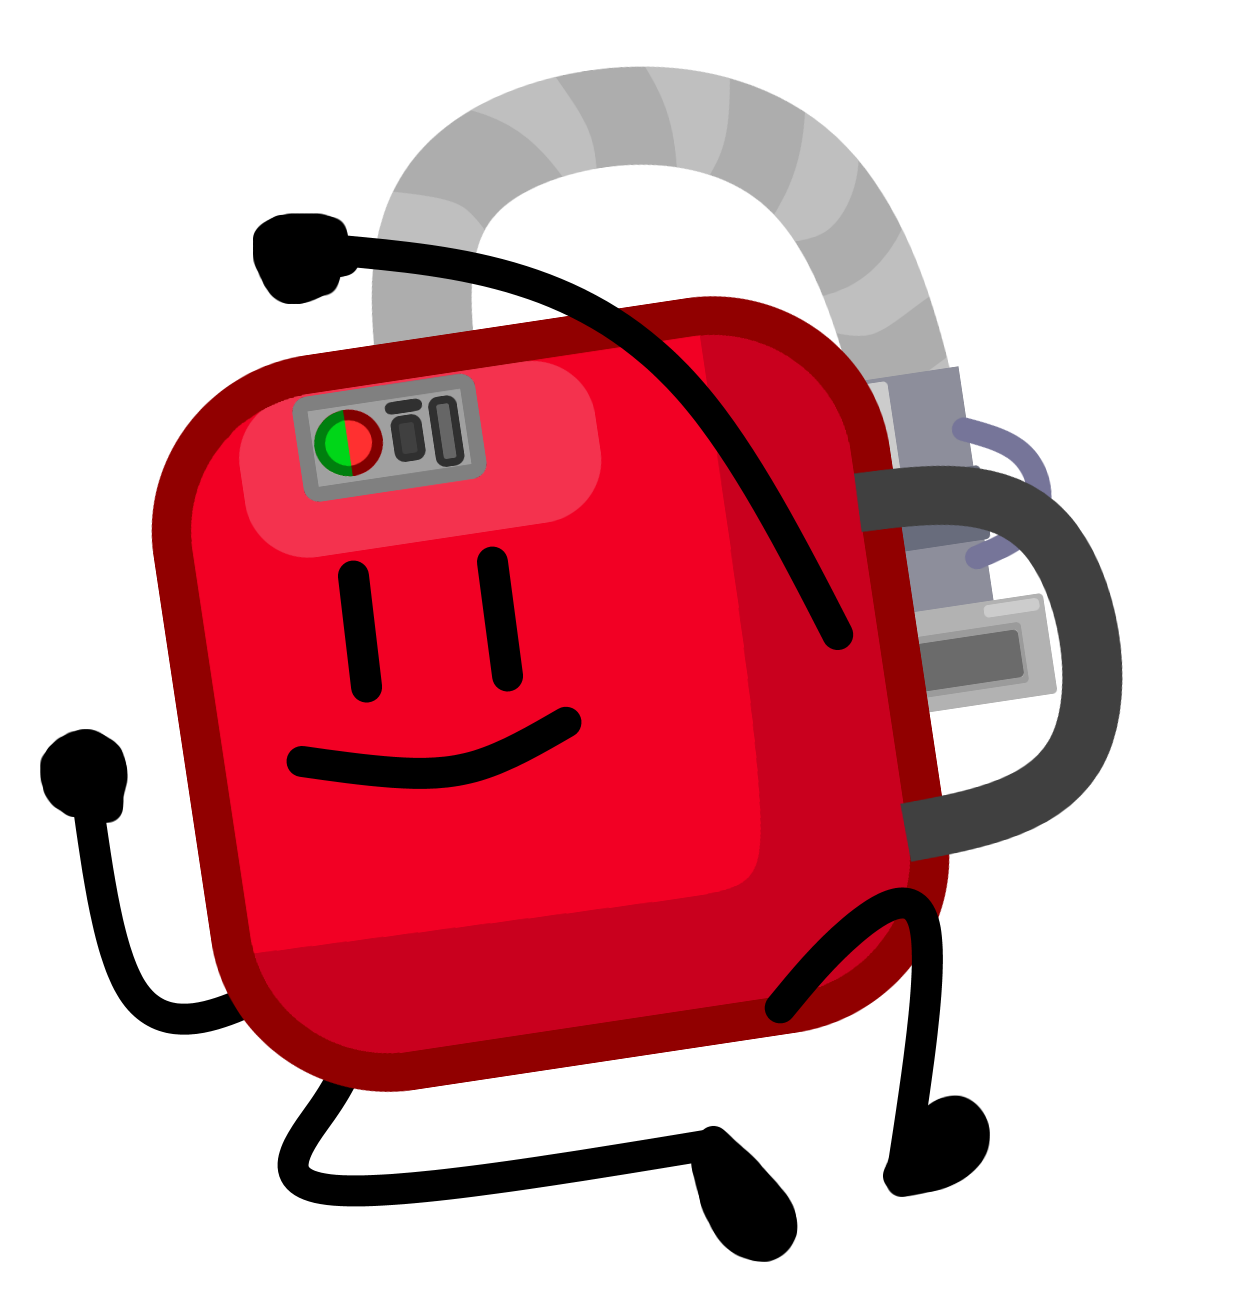 toaster clipart epic